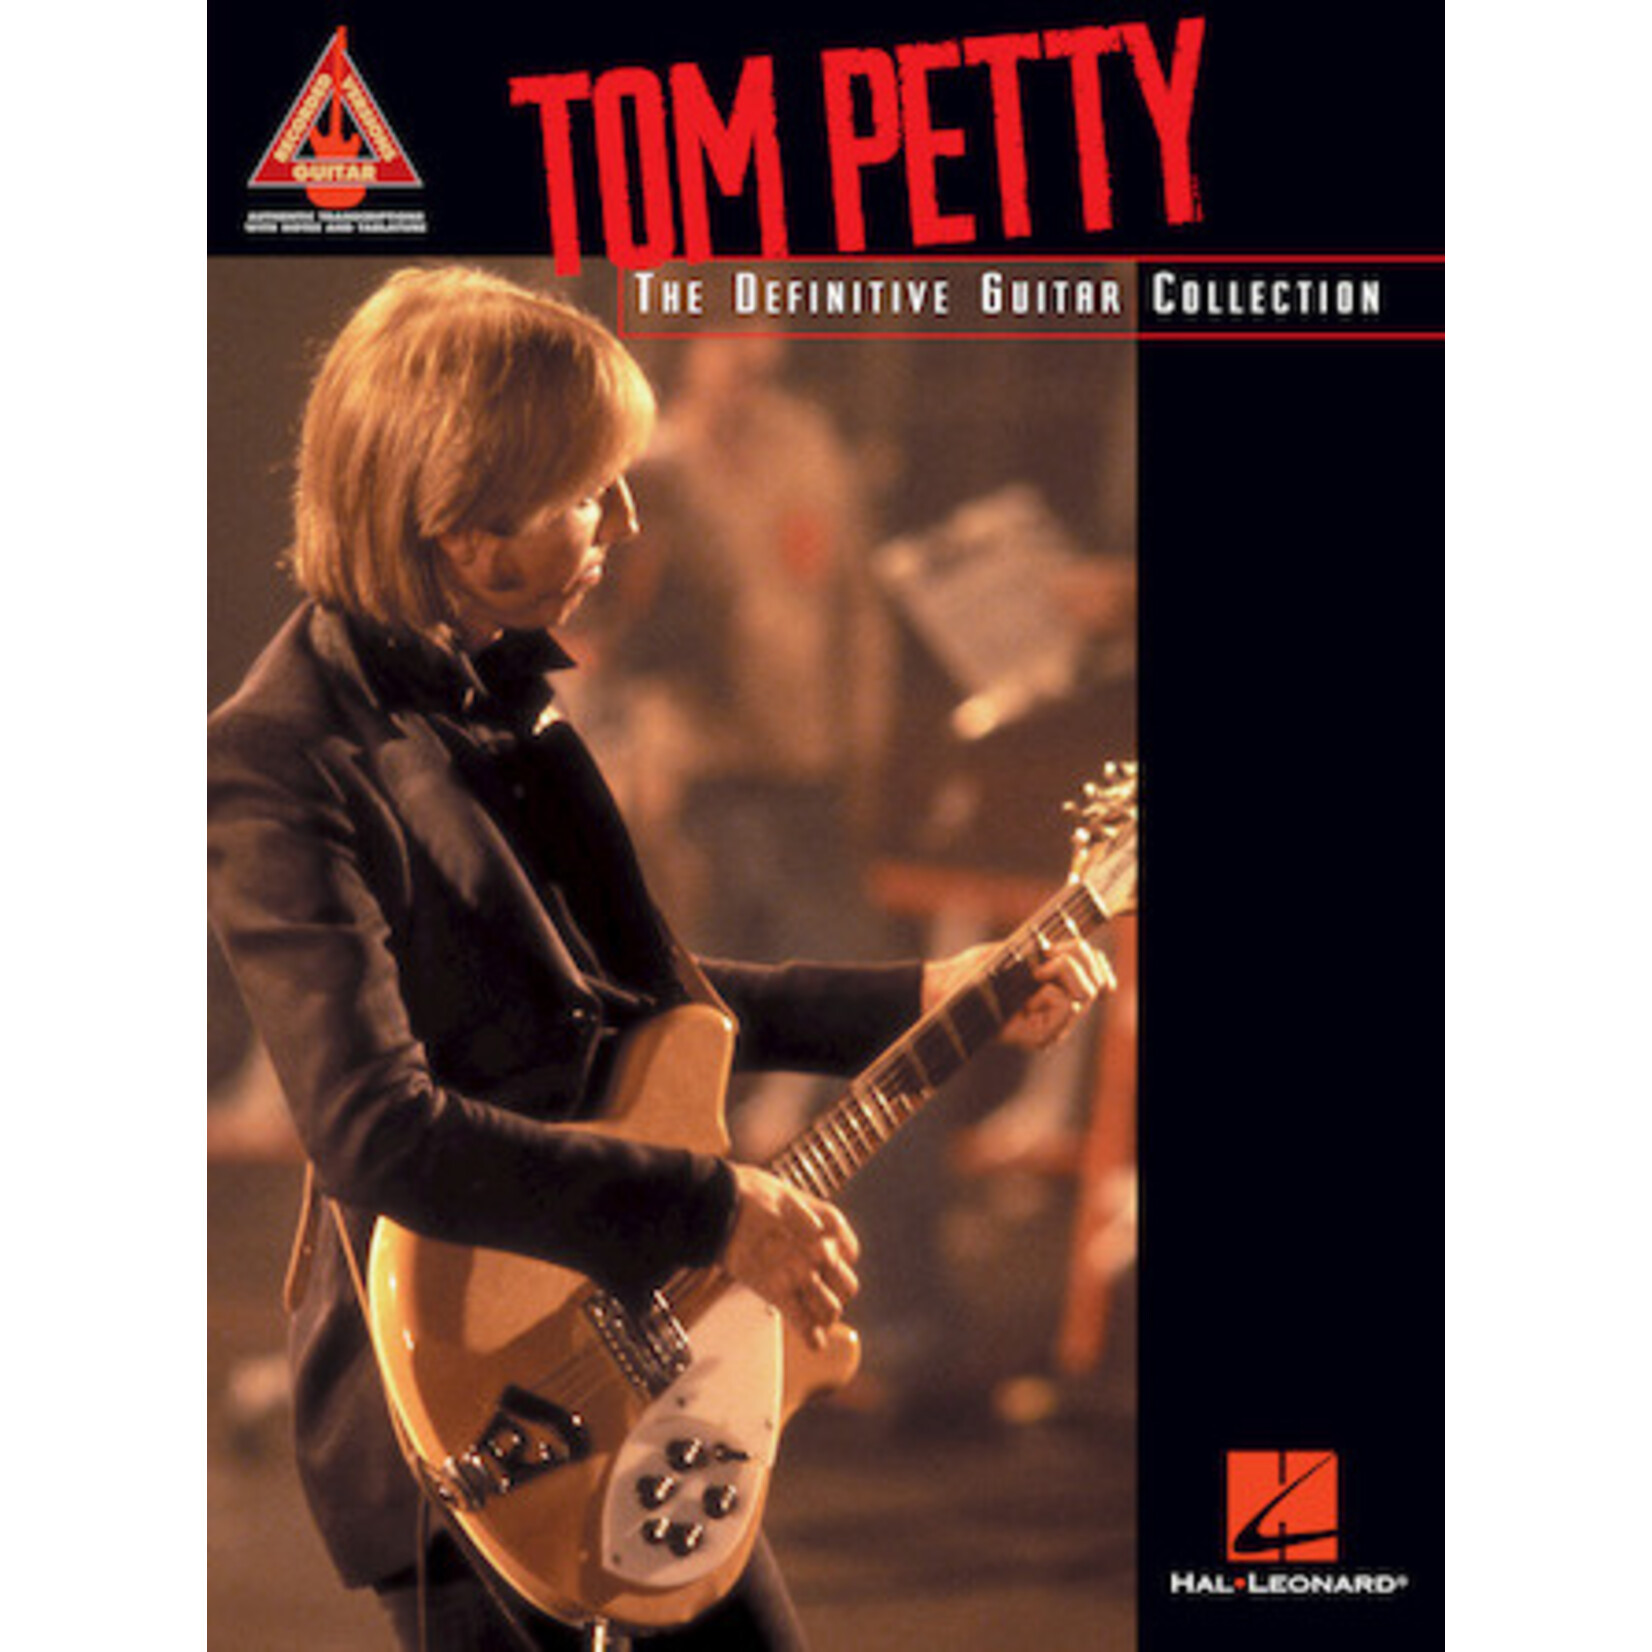 Tom Petty The Definitive Guitar Collection